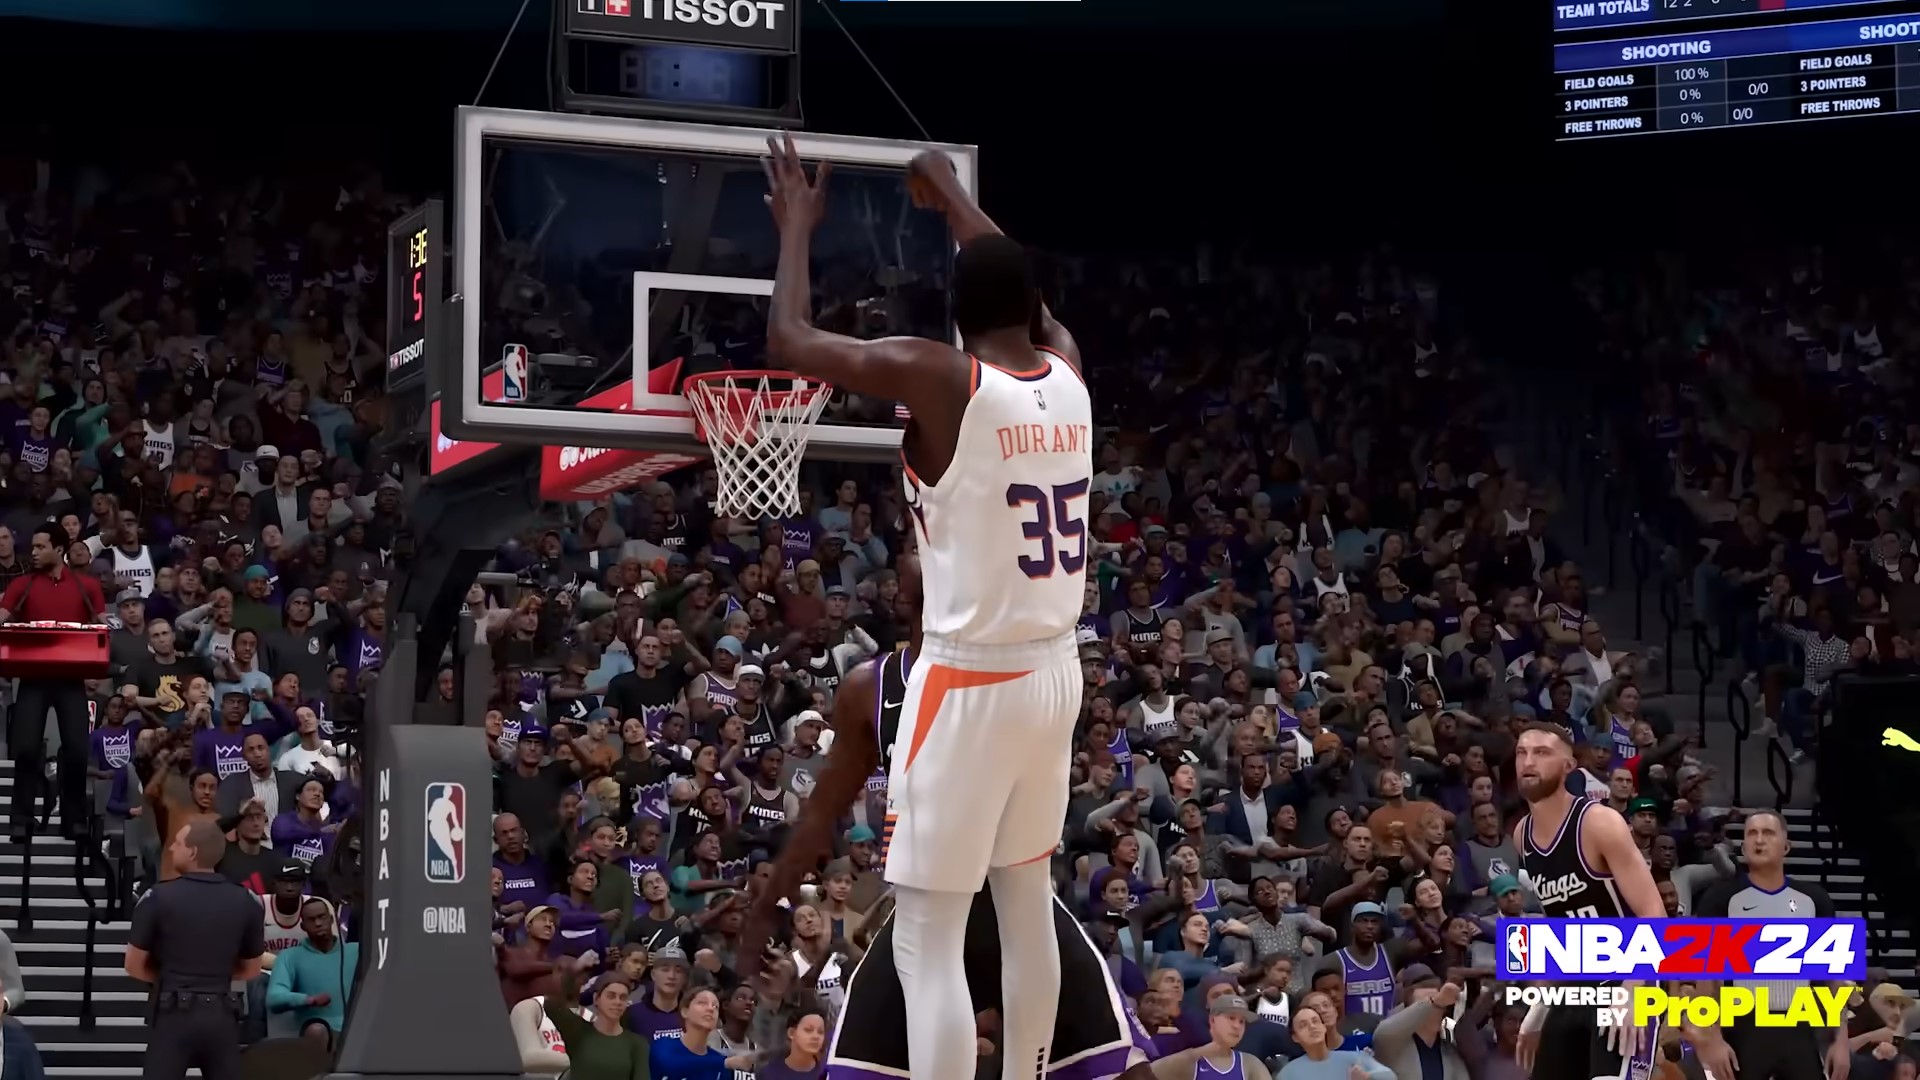 Animations Feature In NBA 2K24